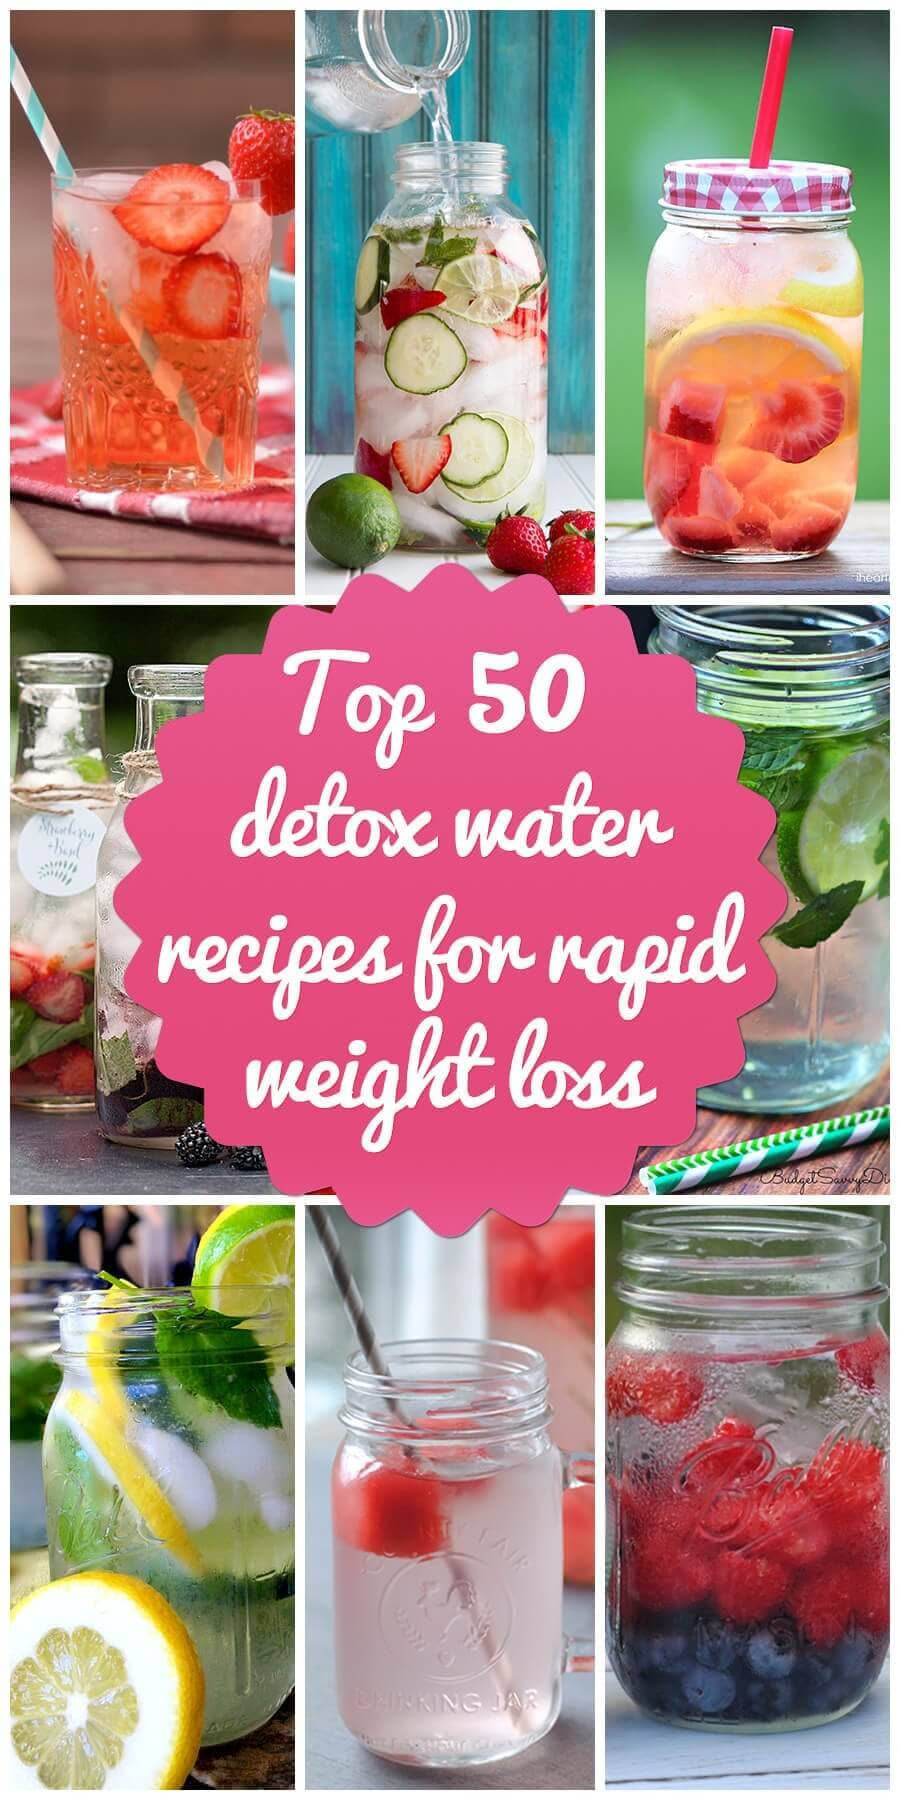 Water Detox Recipes For Weight Loss
 Top 50 Detox Water Recipes for Rapid Weight Loss